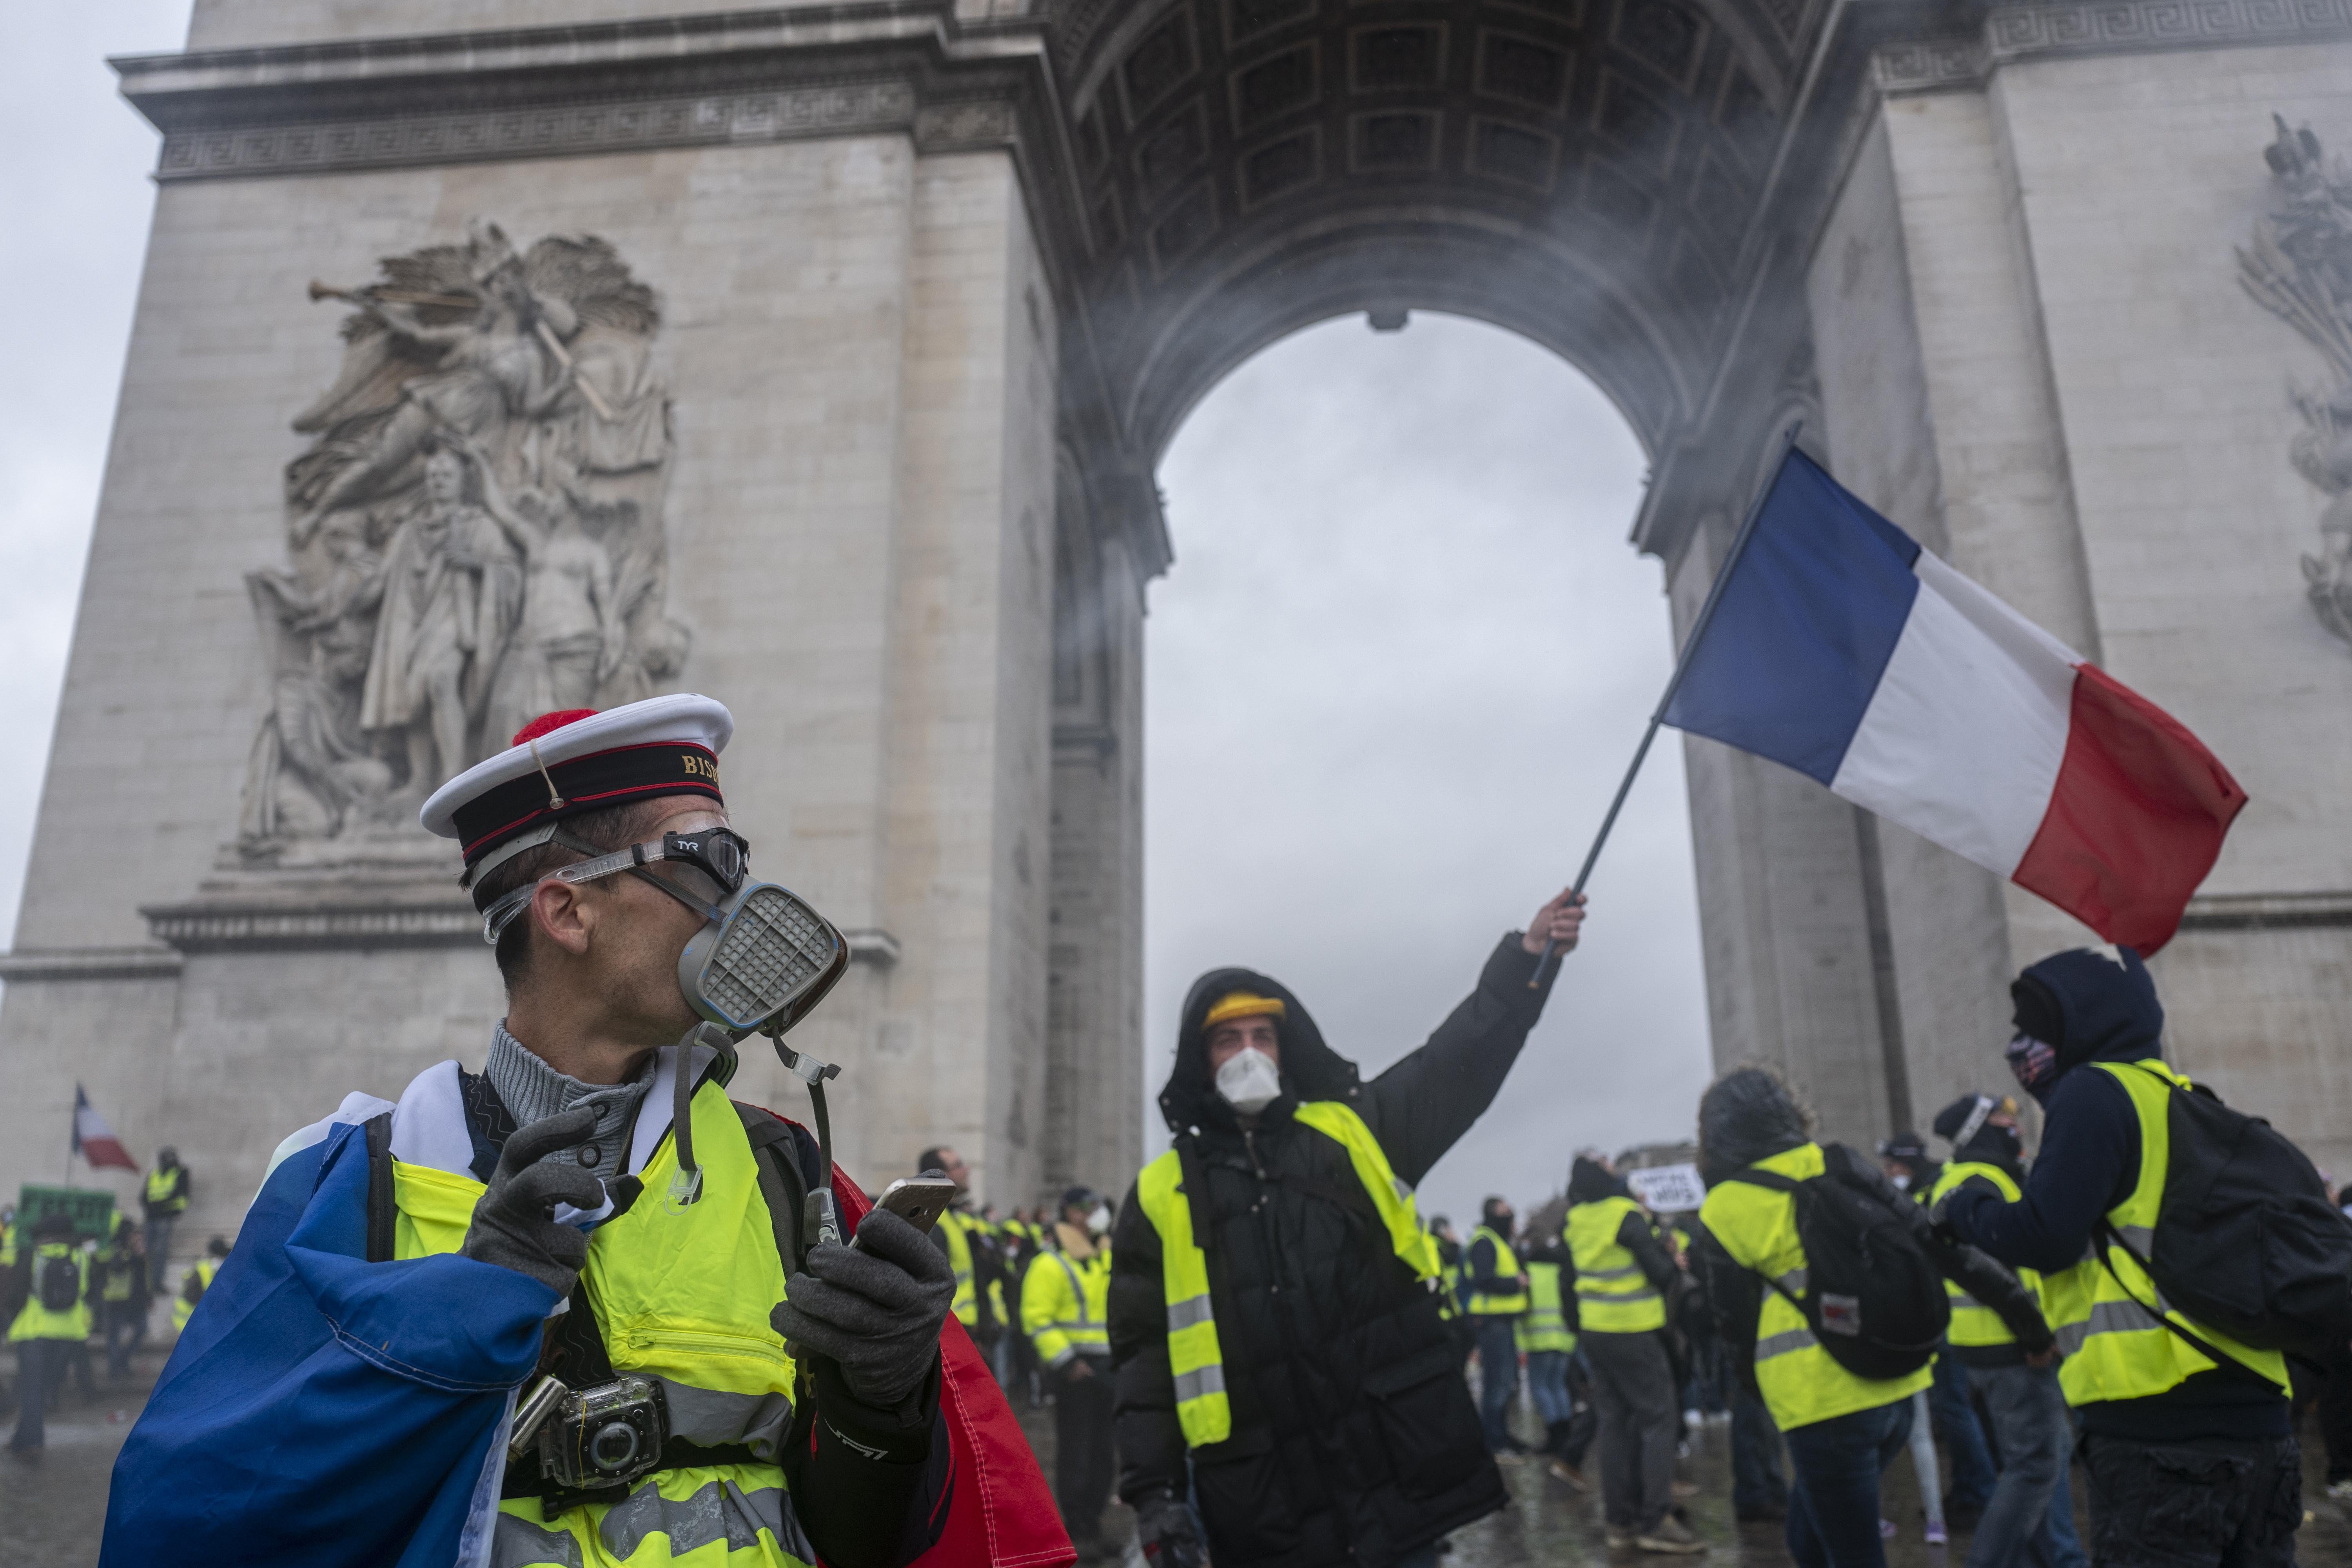 Protesters and riot police at the Arc de Triomphe during "Yellow Vest" protests